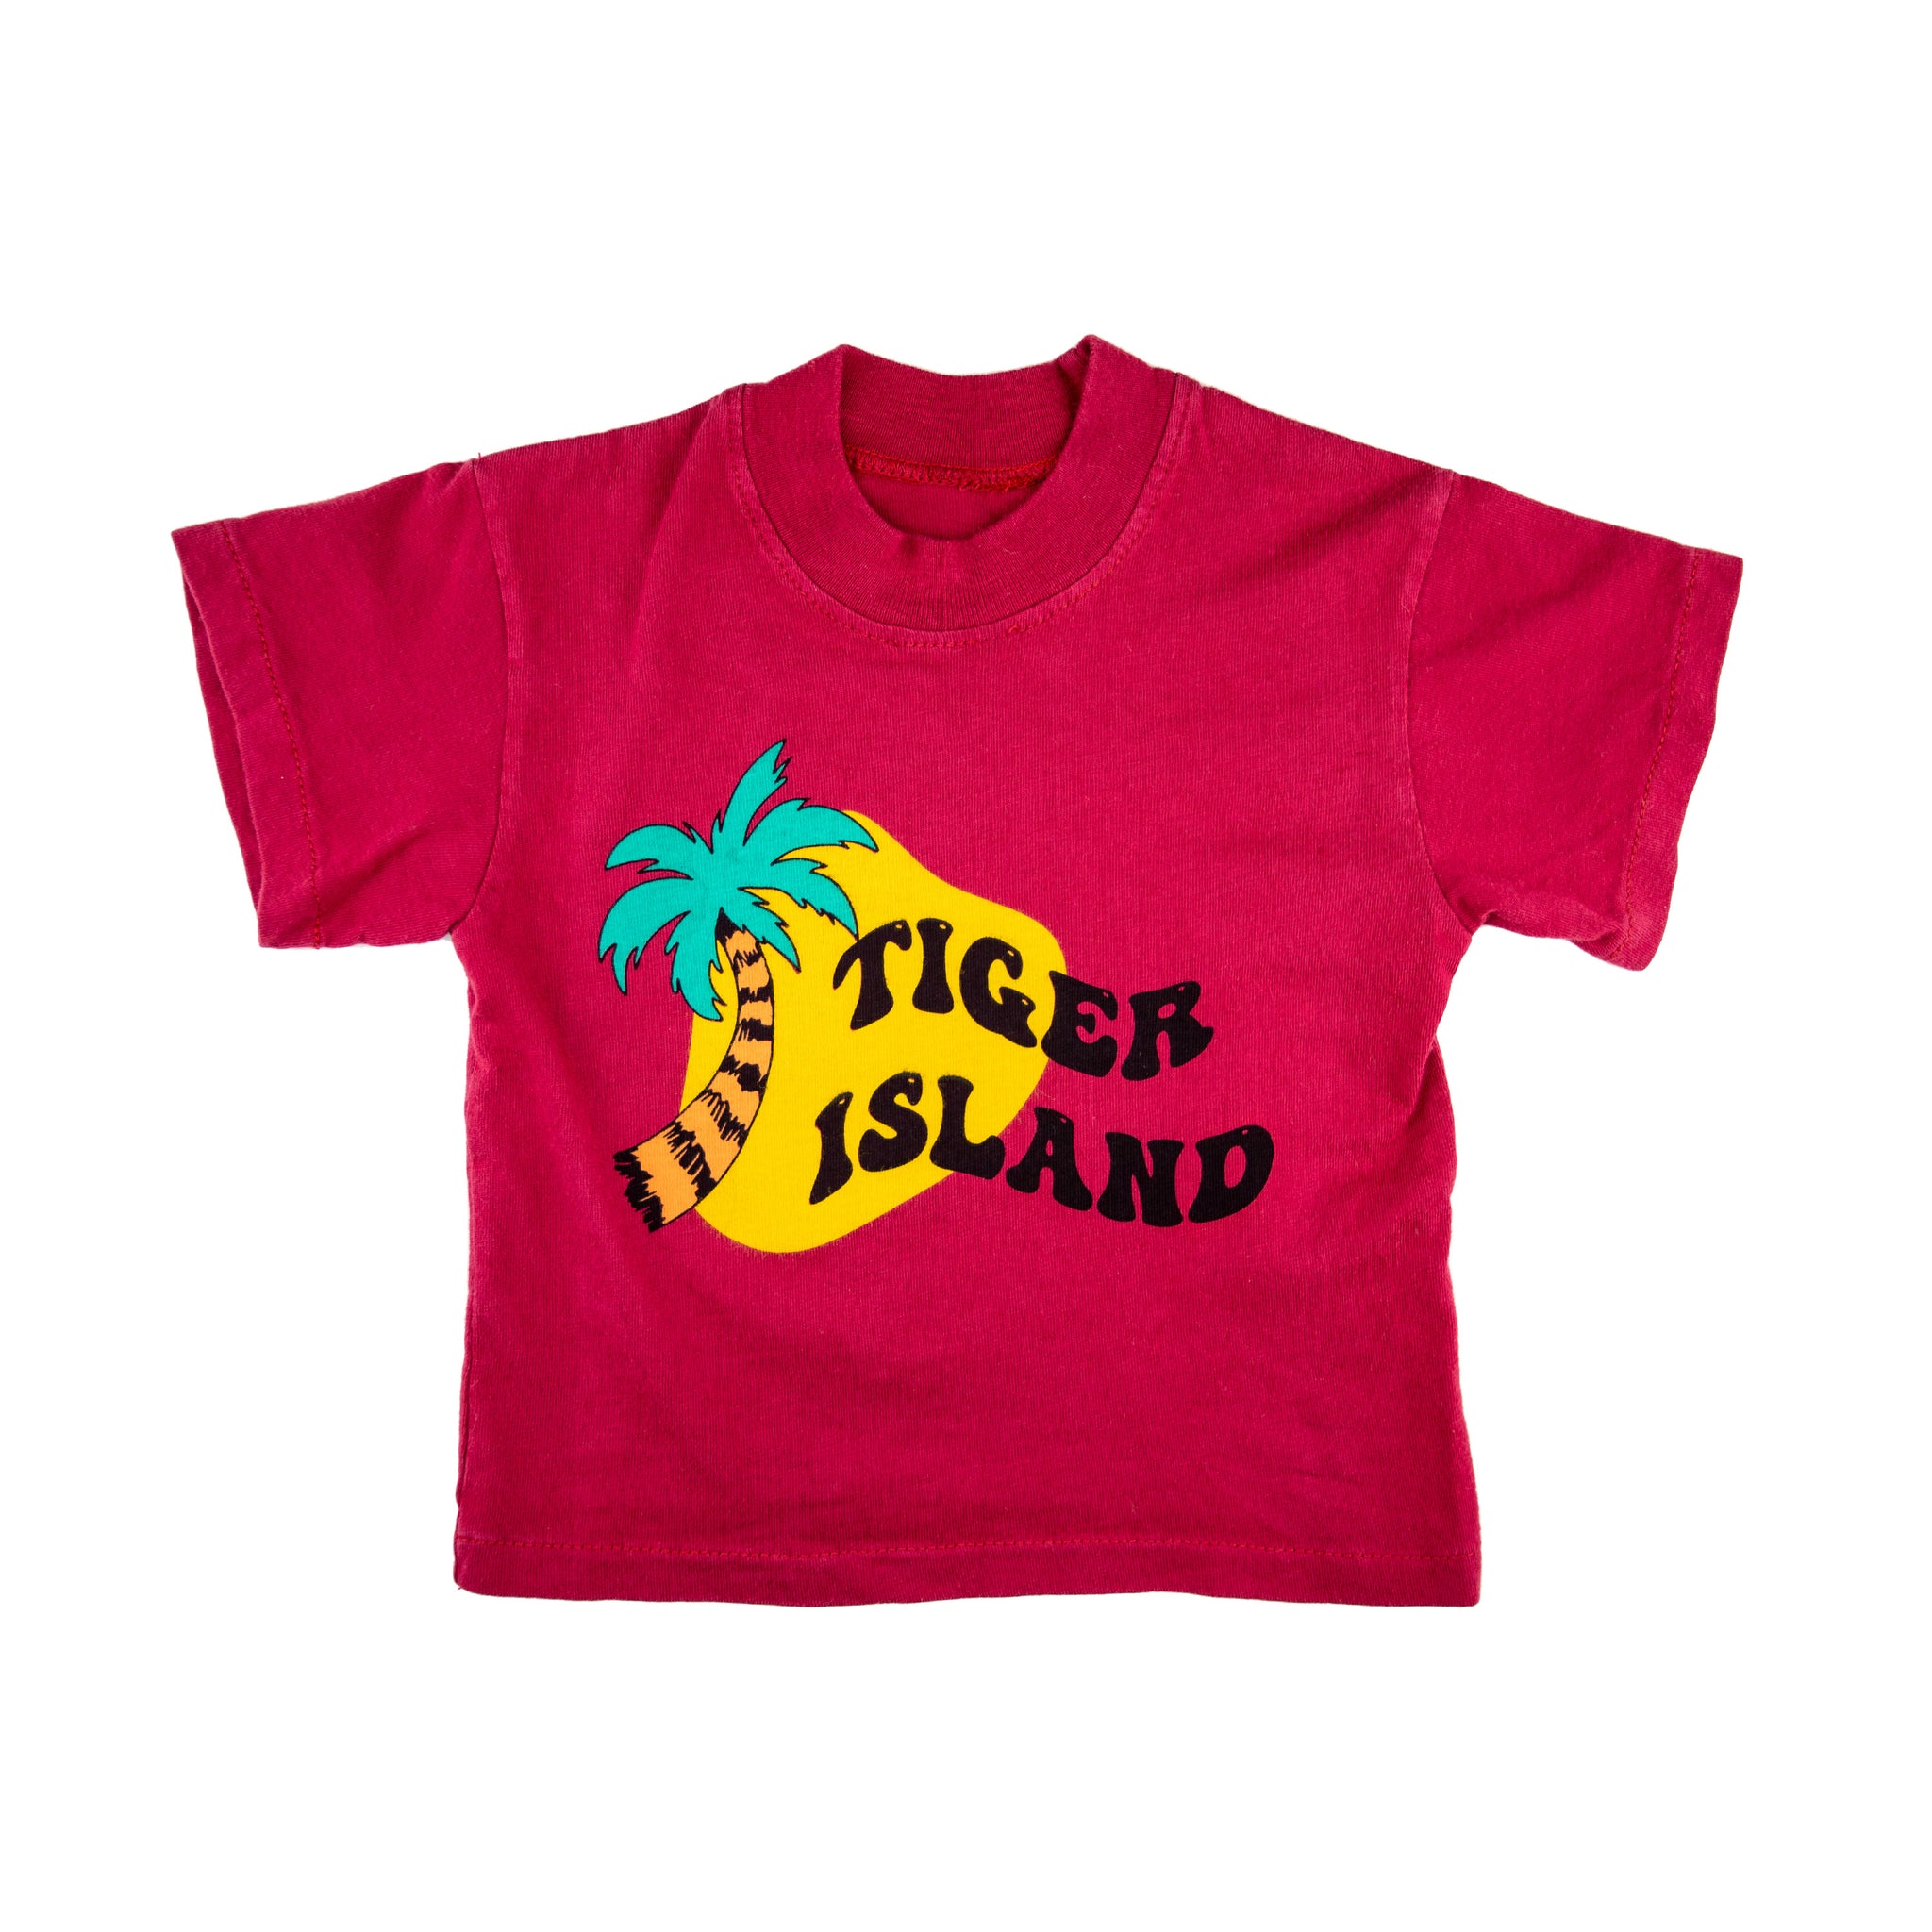 ON THE ISLAND TIGER シャツ